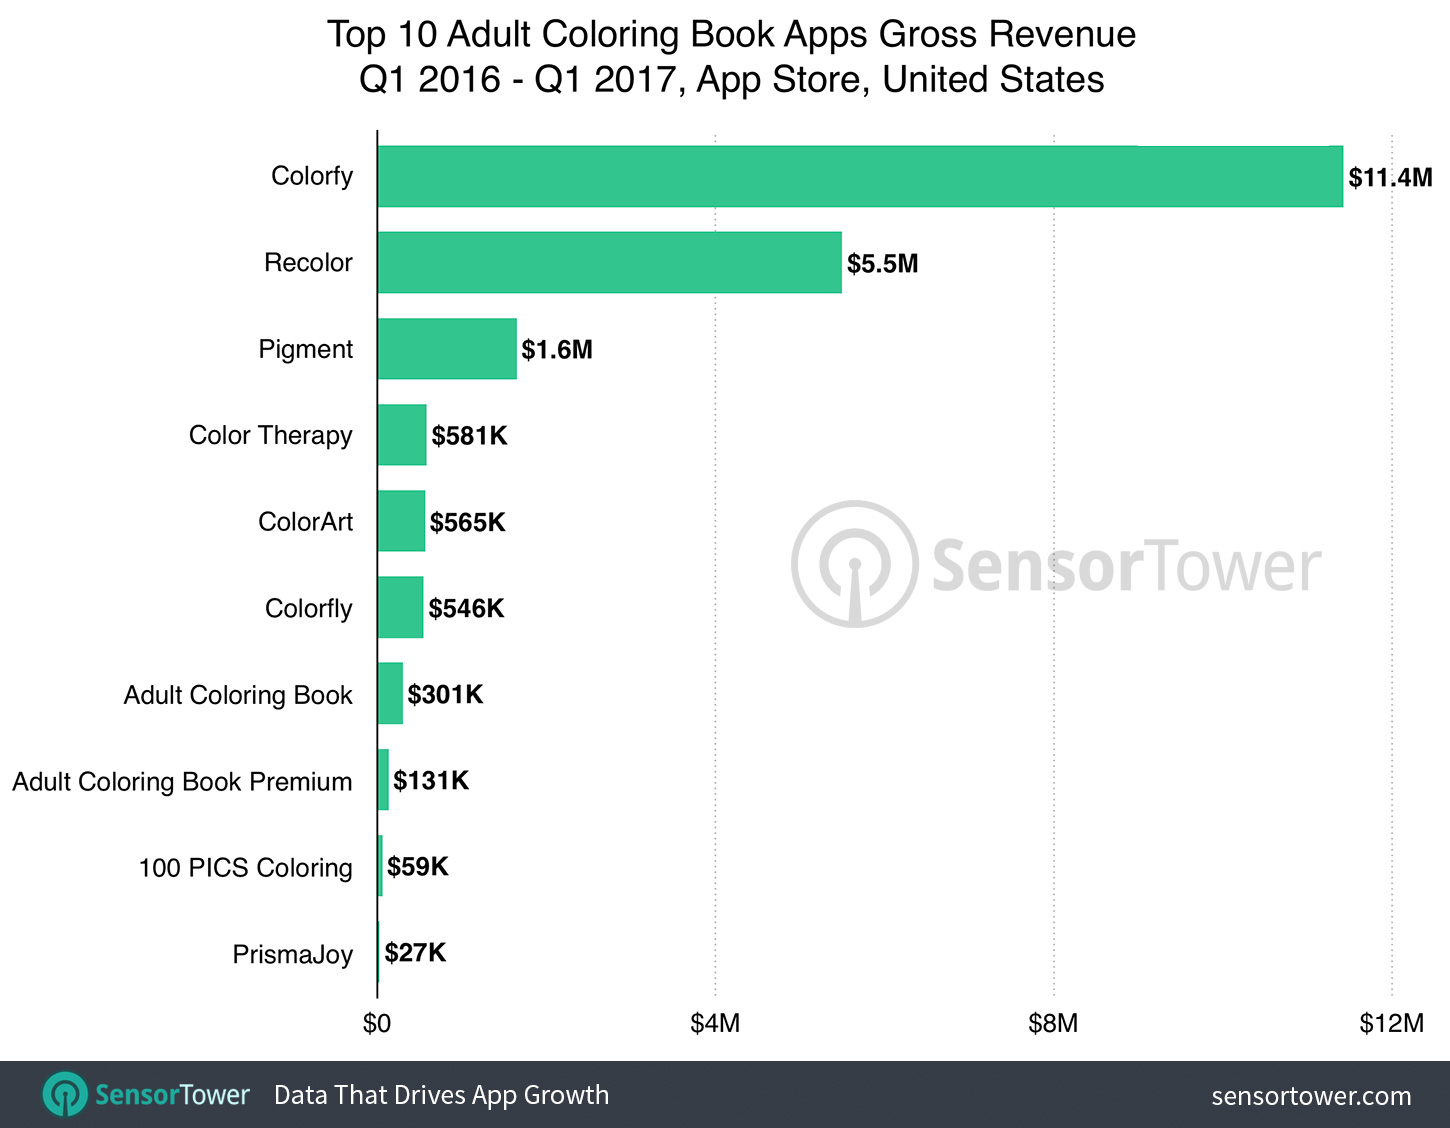 Top 10 Adult Coloring Book Apps on the U.S. App Store Since Q1 2016 by Revenue